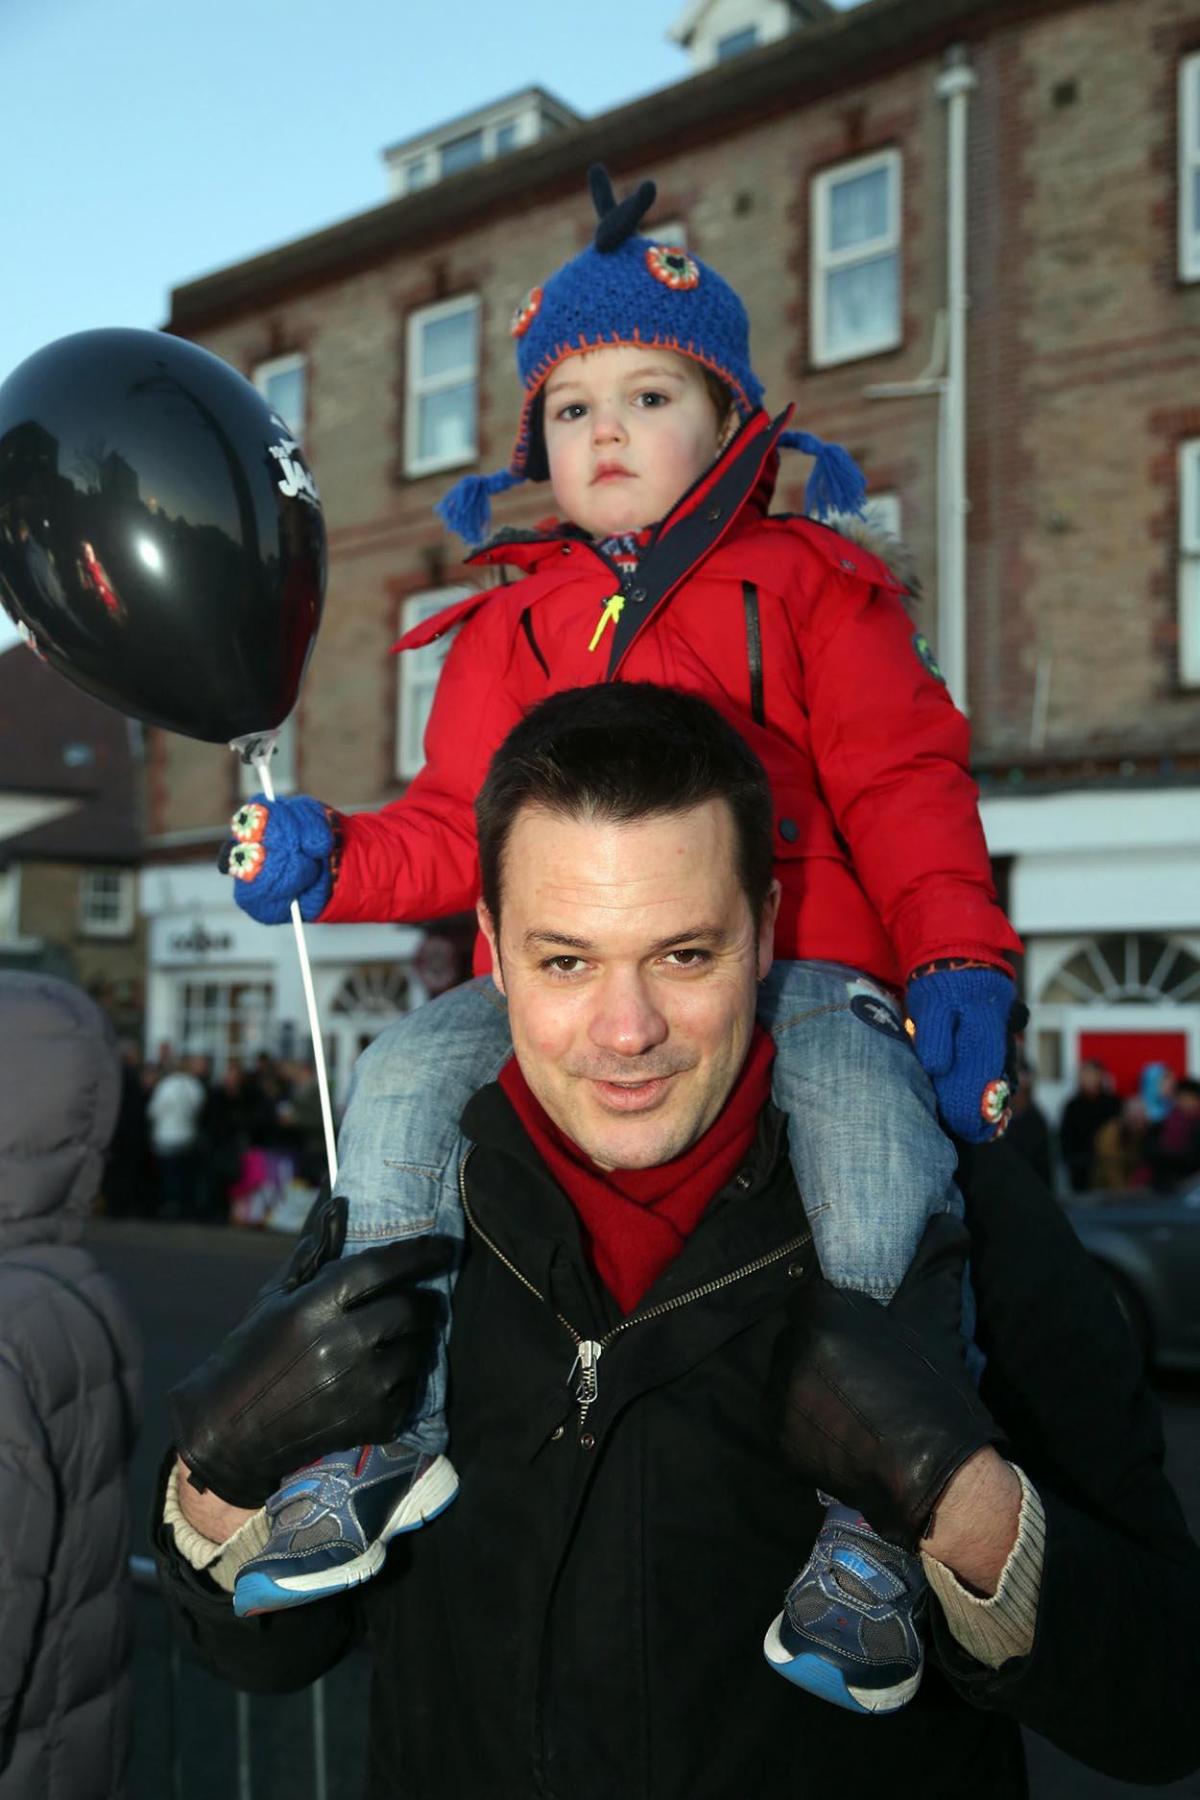 All the pictures from Westbourne Christmas lights switch-on, Saturday December 6, 2014.